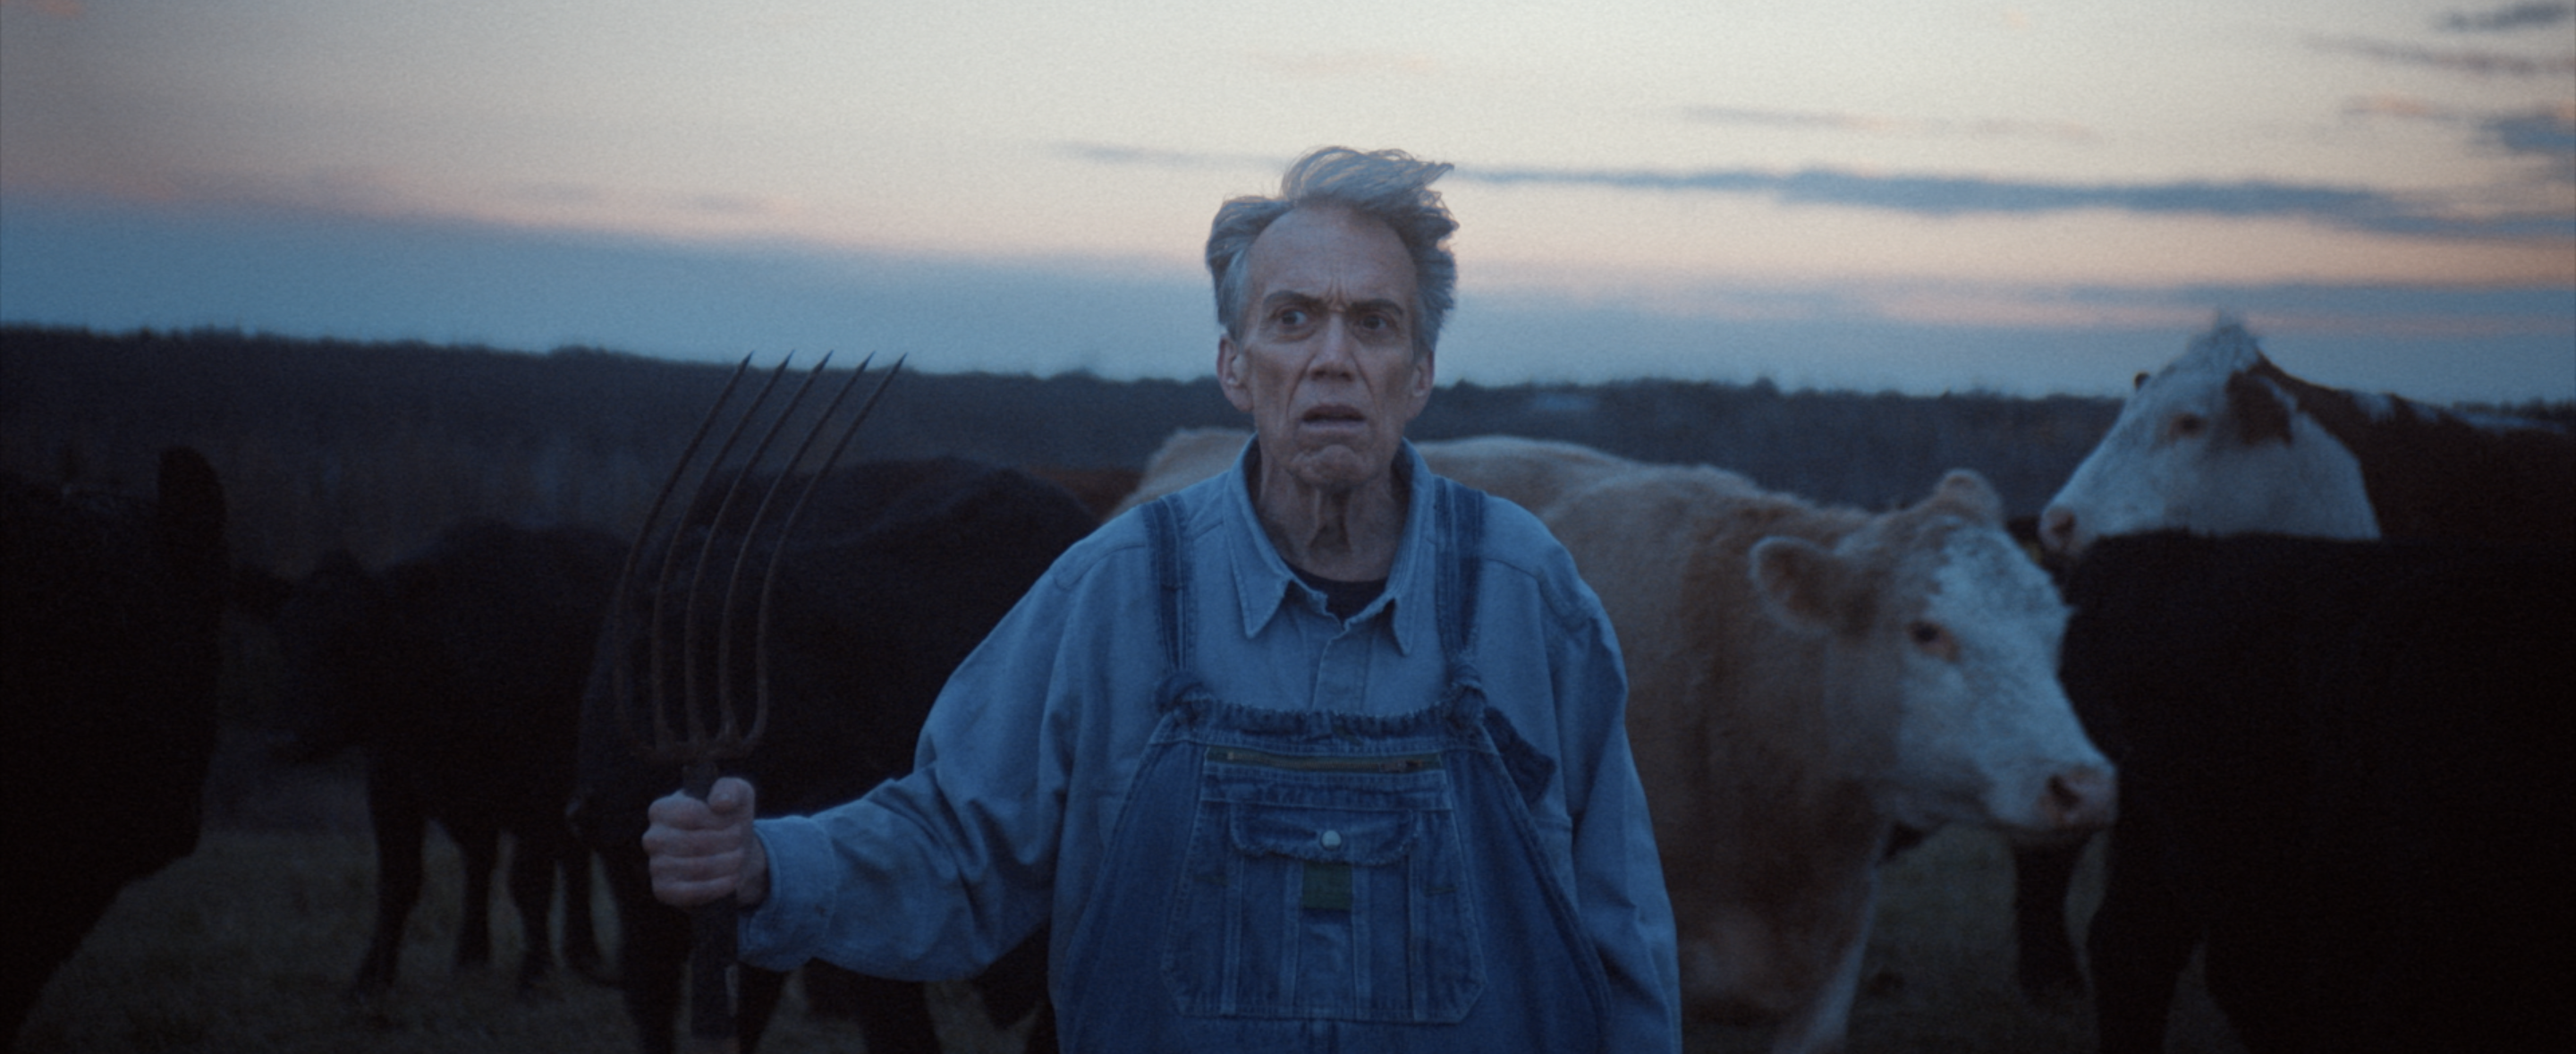 An old man is standing in the farm, holding a farm rake, with cows in the background.